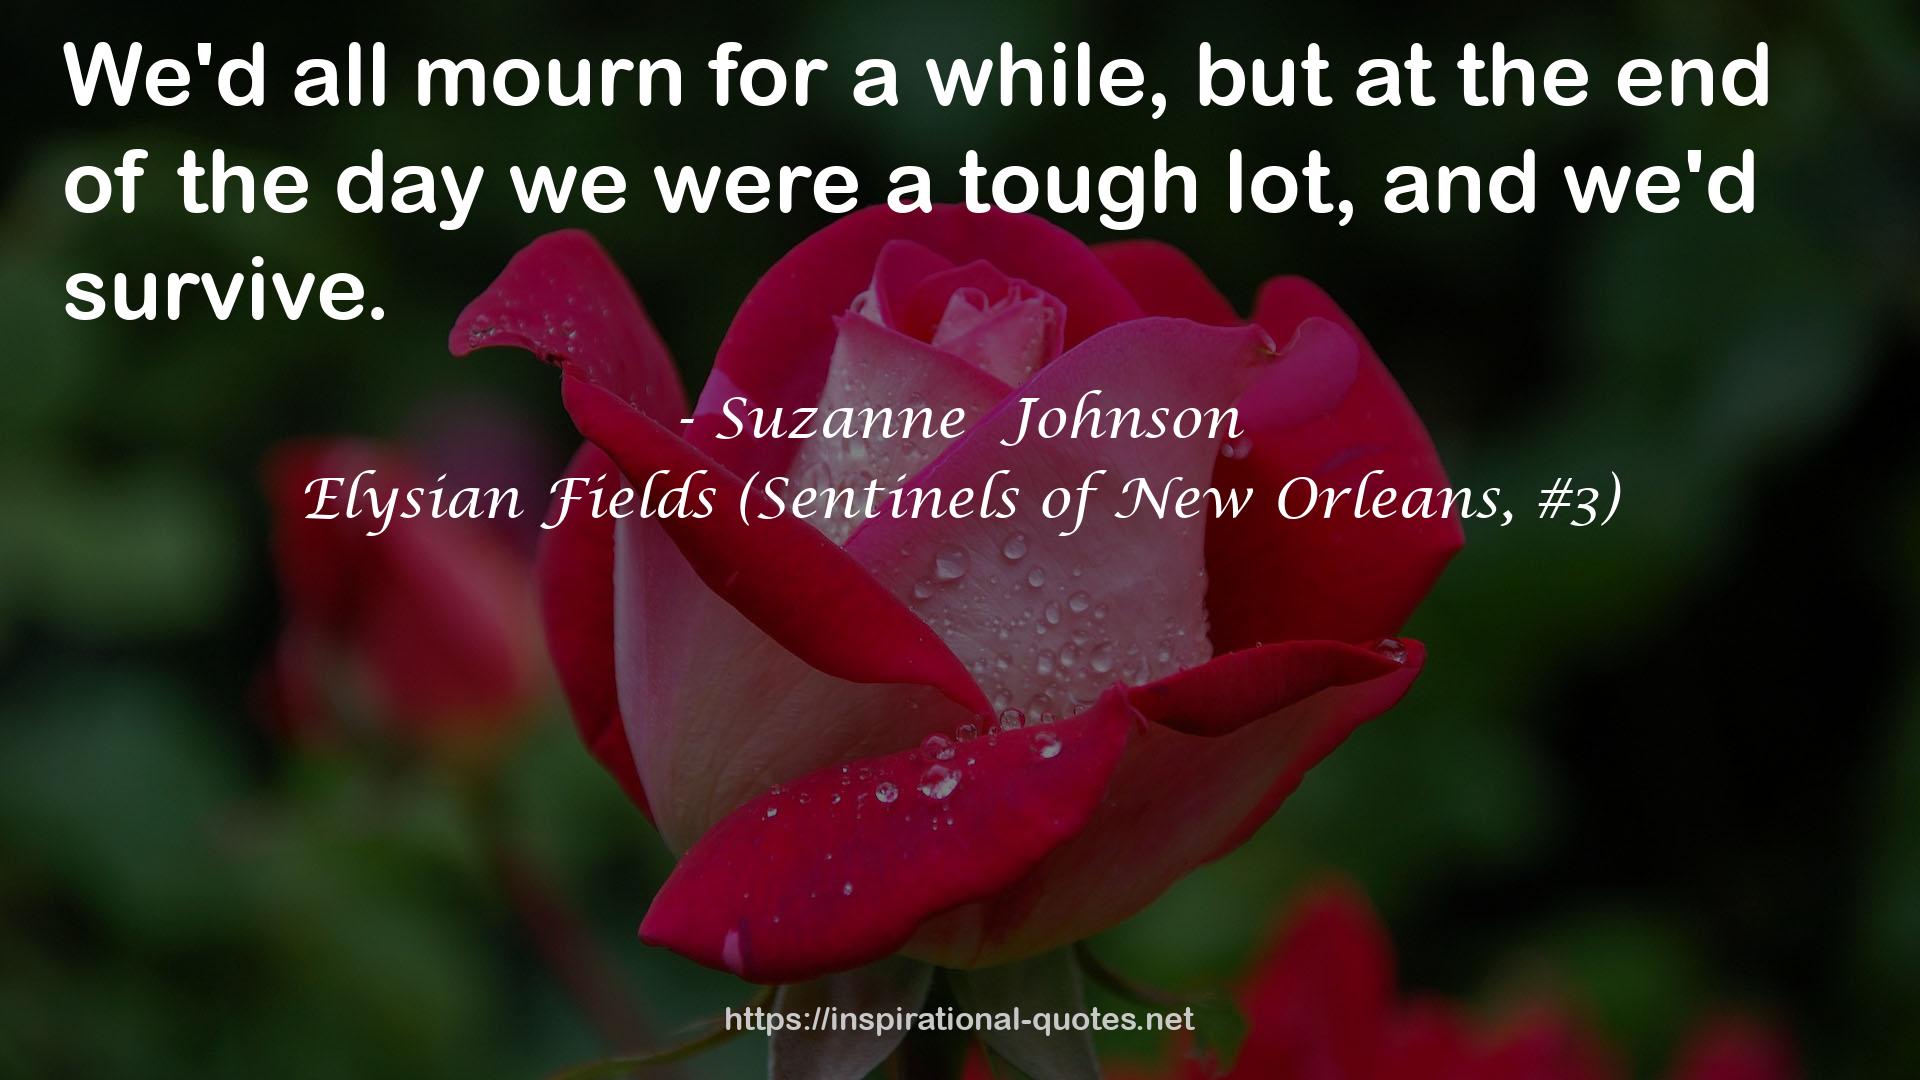 Elysian Fields (Sentinels of New Orleans, #3) QUOTES